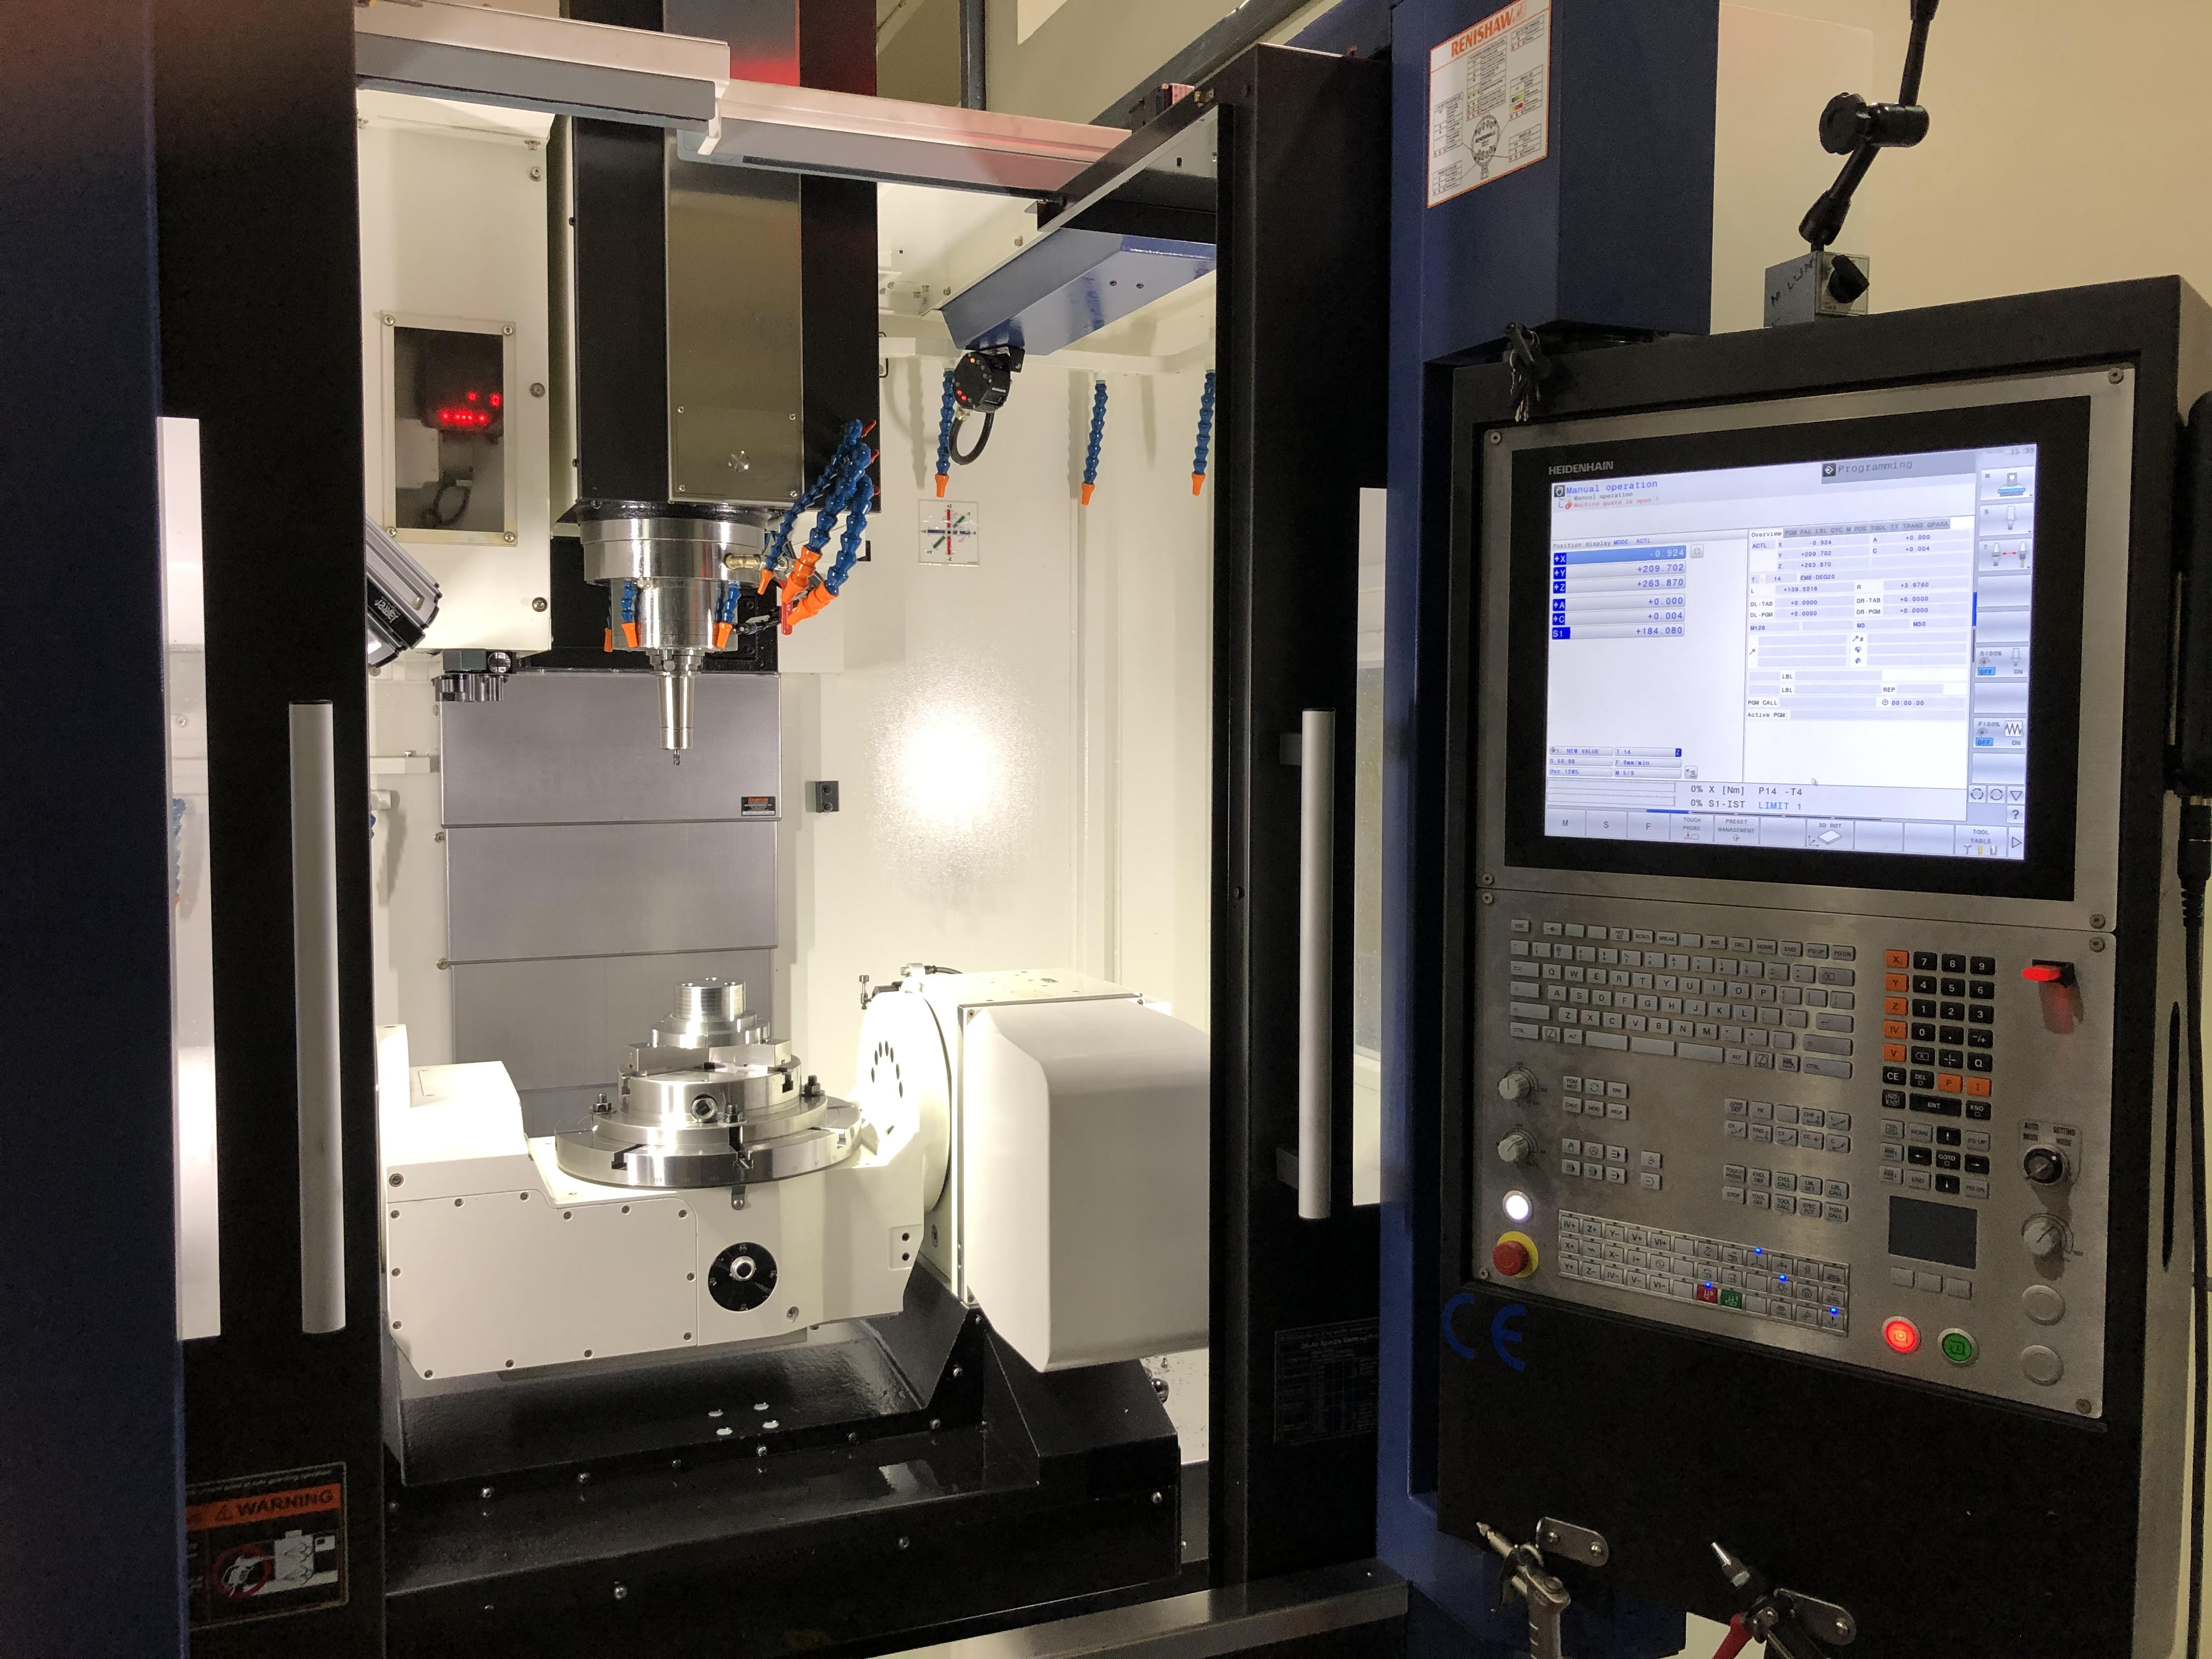 The additional 5-axis movement allows for machining angles and arcs of more than 300 engineering-grade plastics and high-performance polymers.